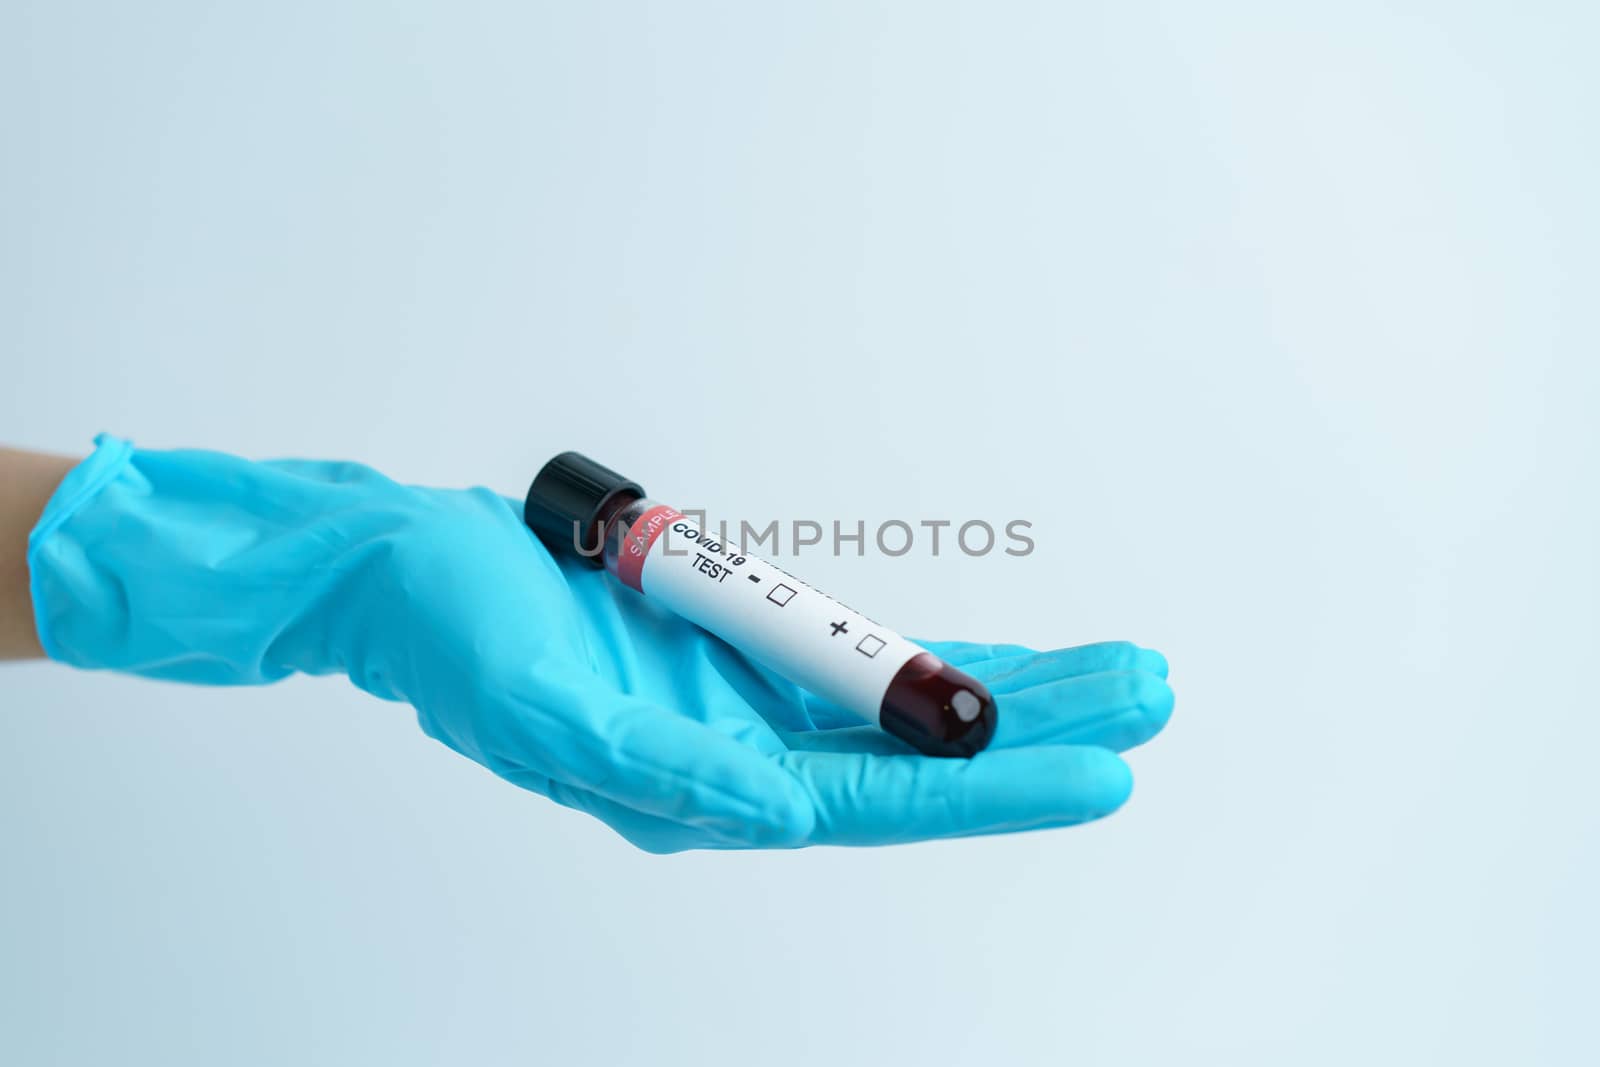 Hand with blue glove holding blood test tube samples of coronavi by sirawit99